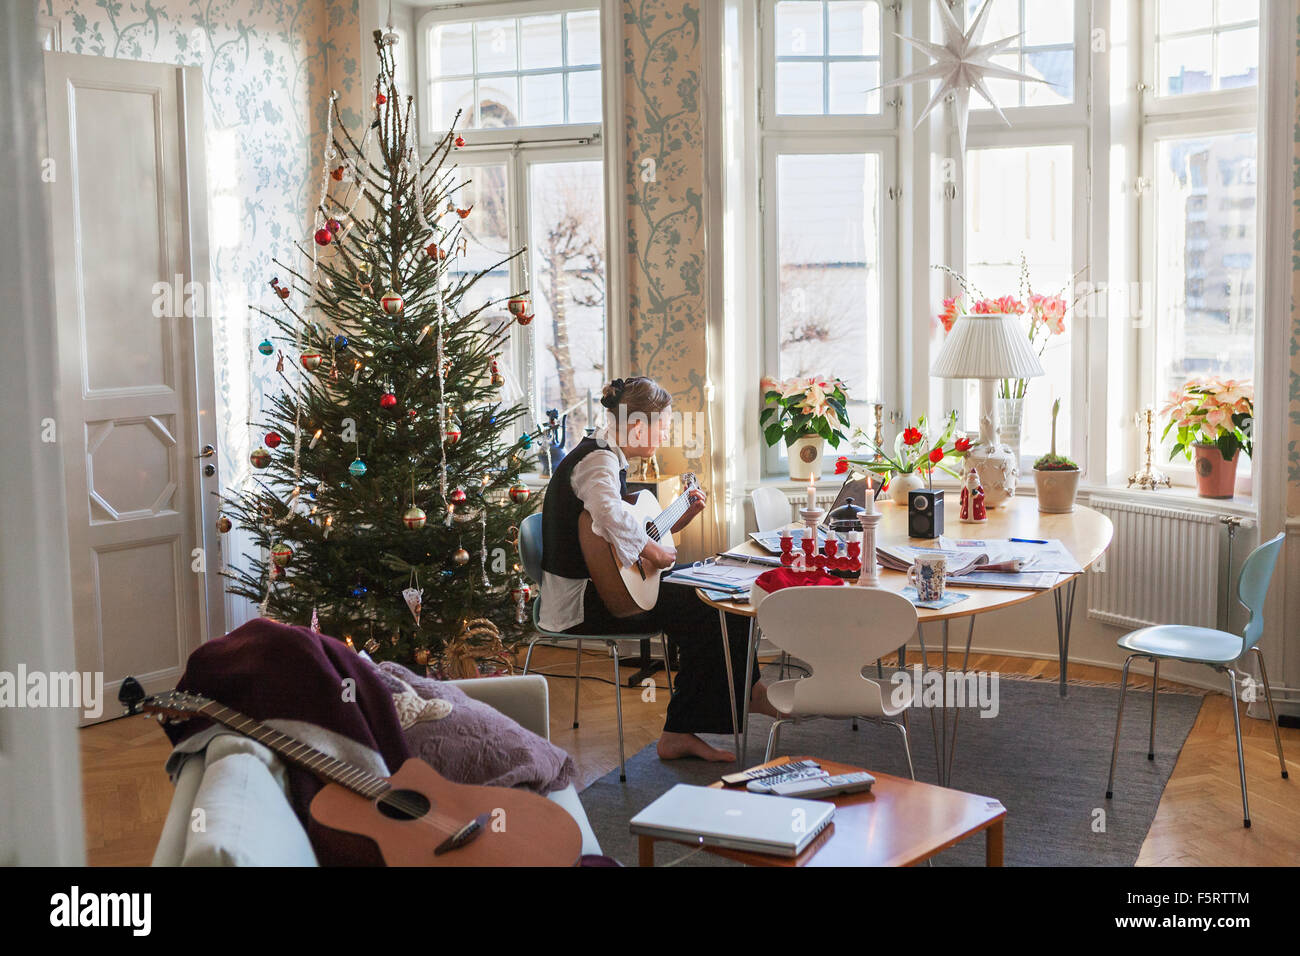 Sweden, Senior woman playing guitar in living room Stock Photo